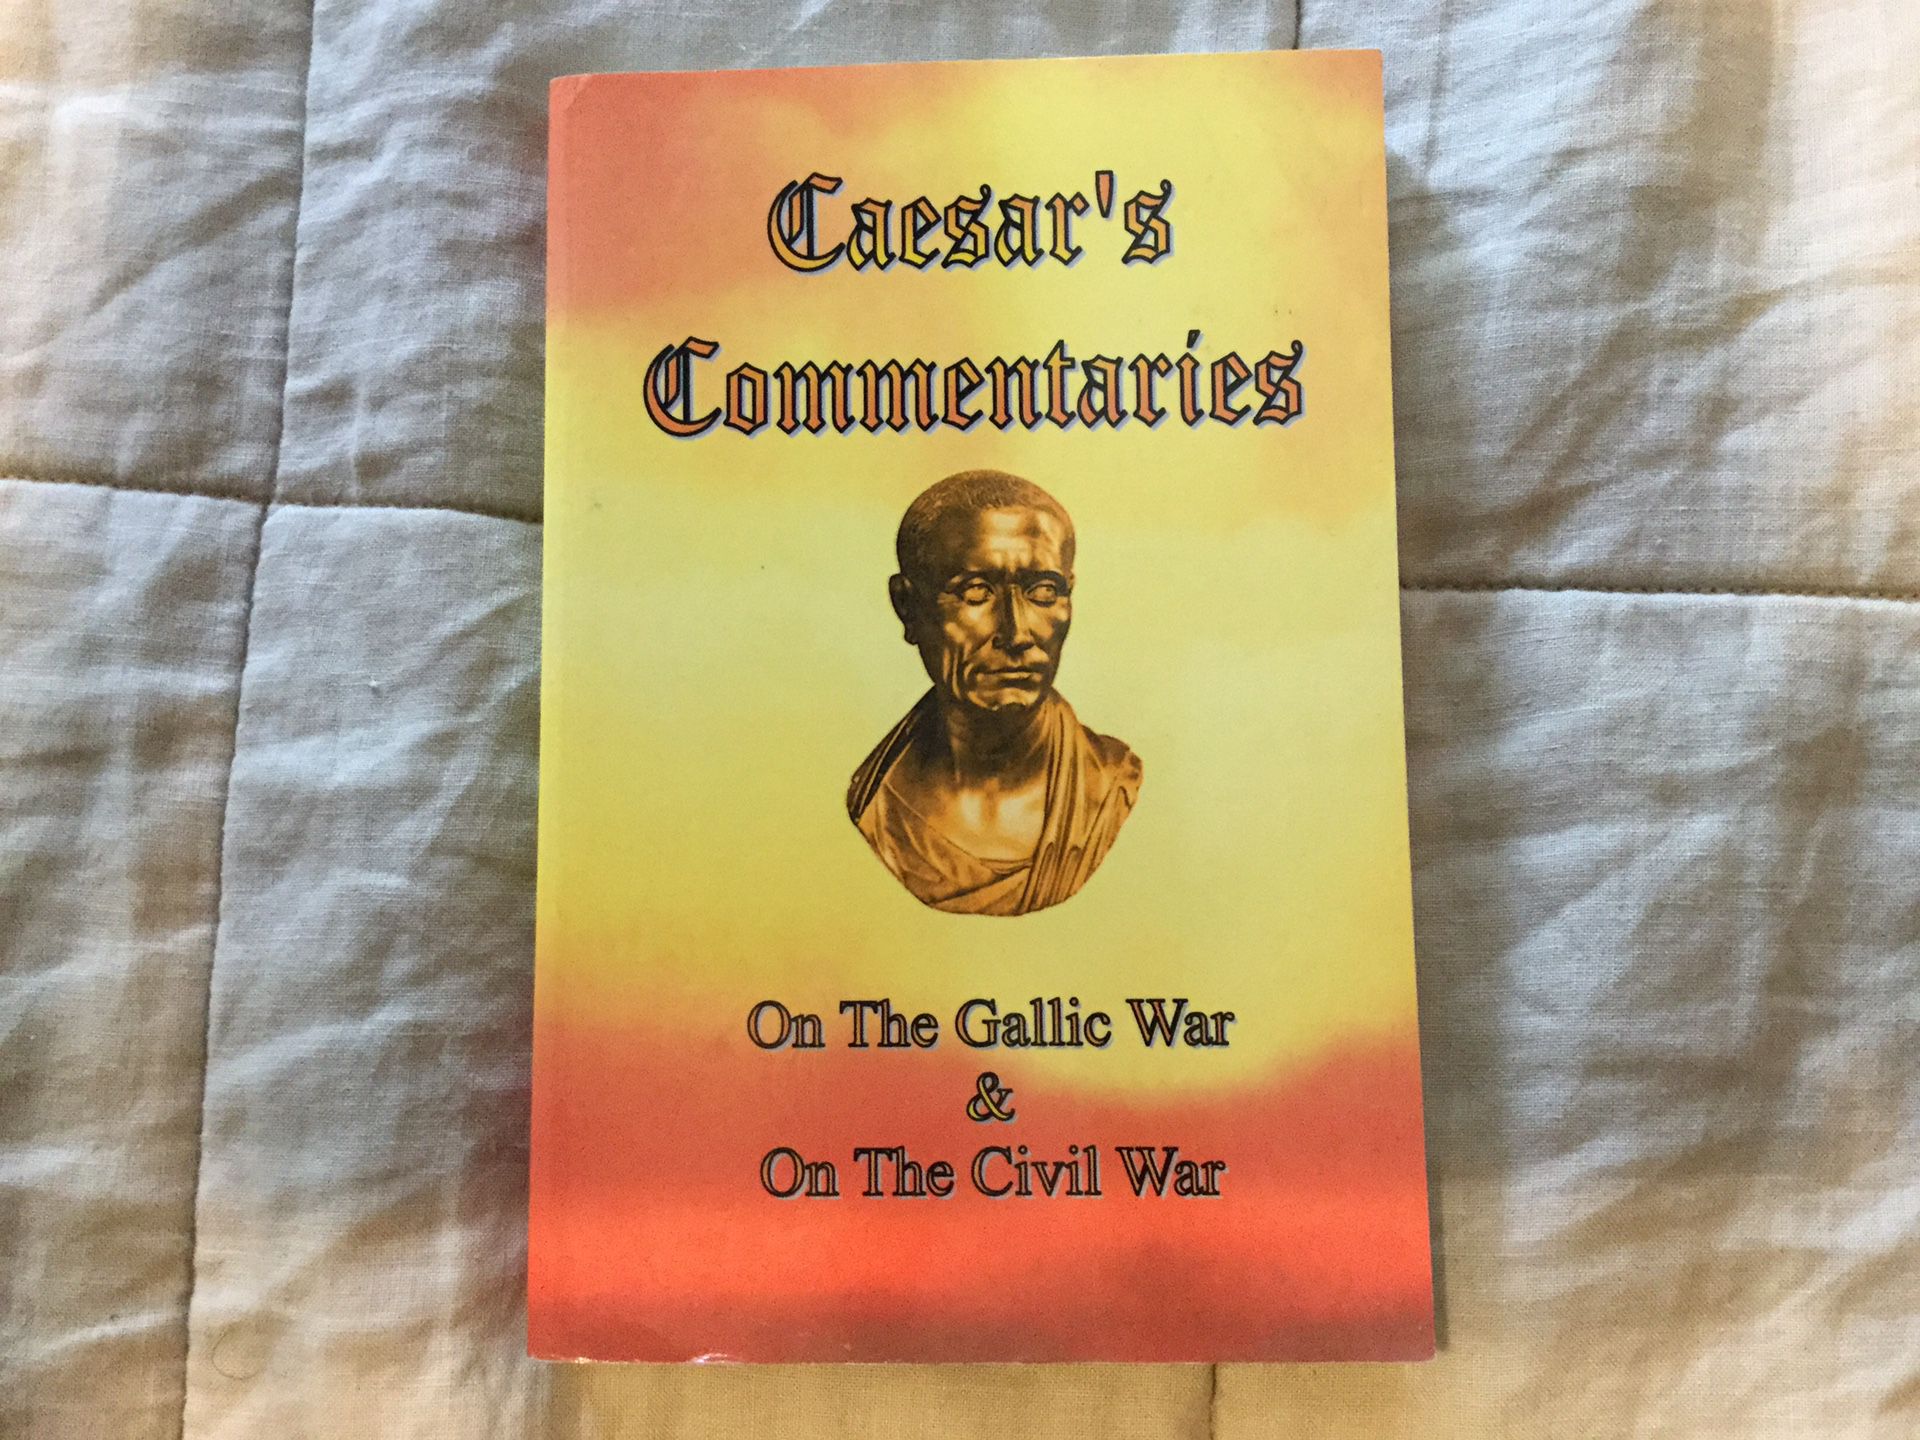 NEW!! Caesars Commentaries on the Gallic War